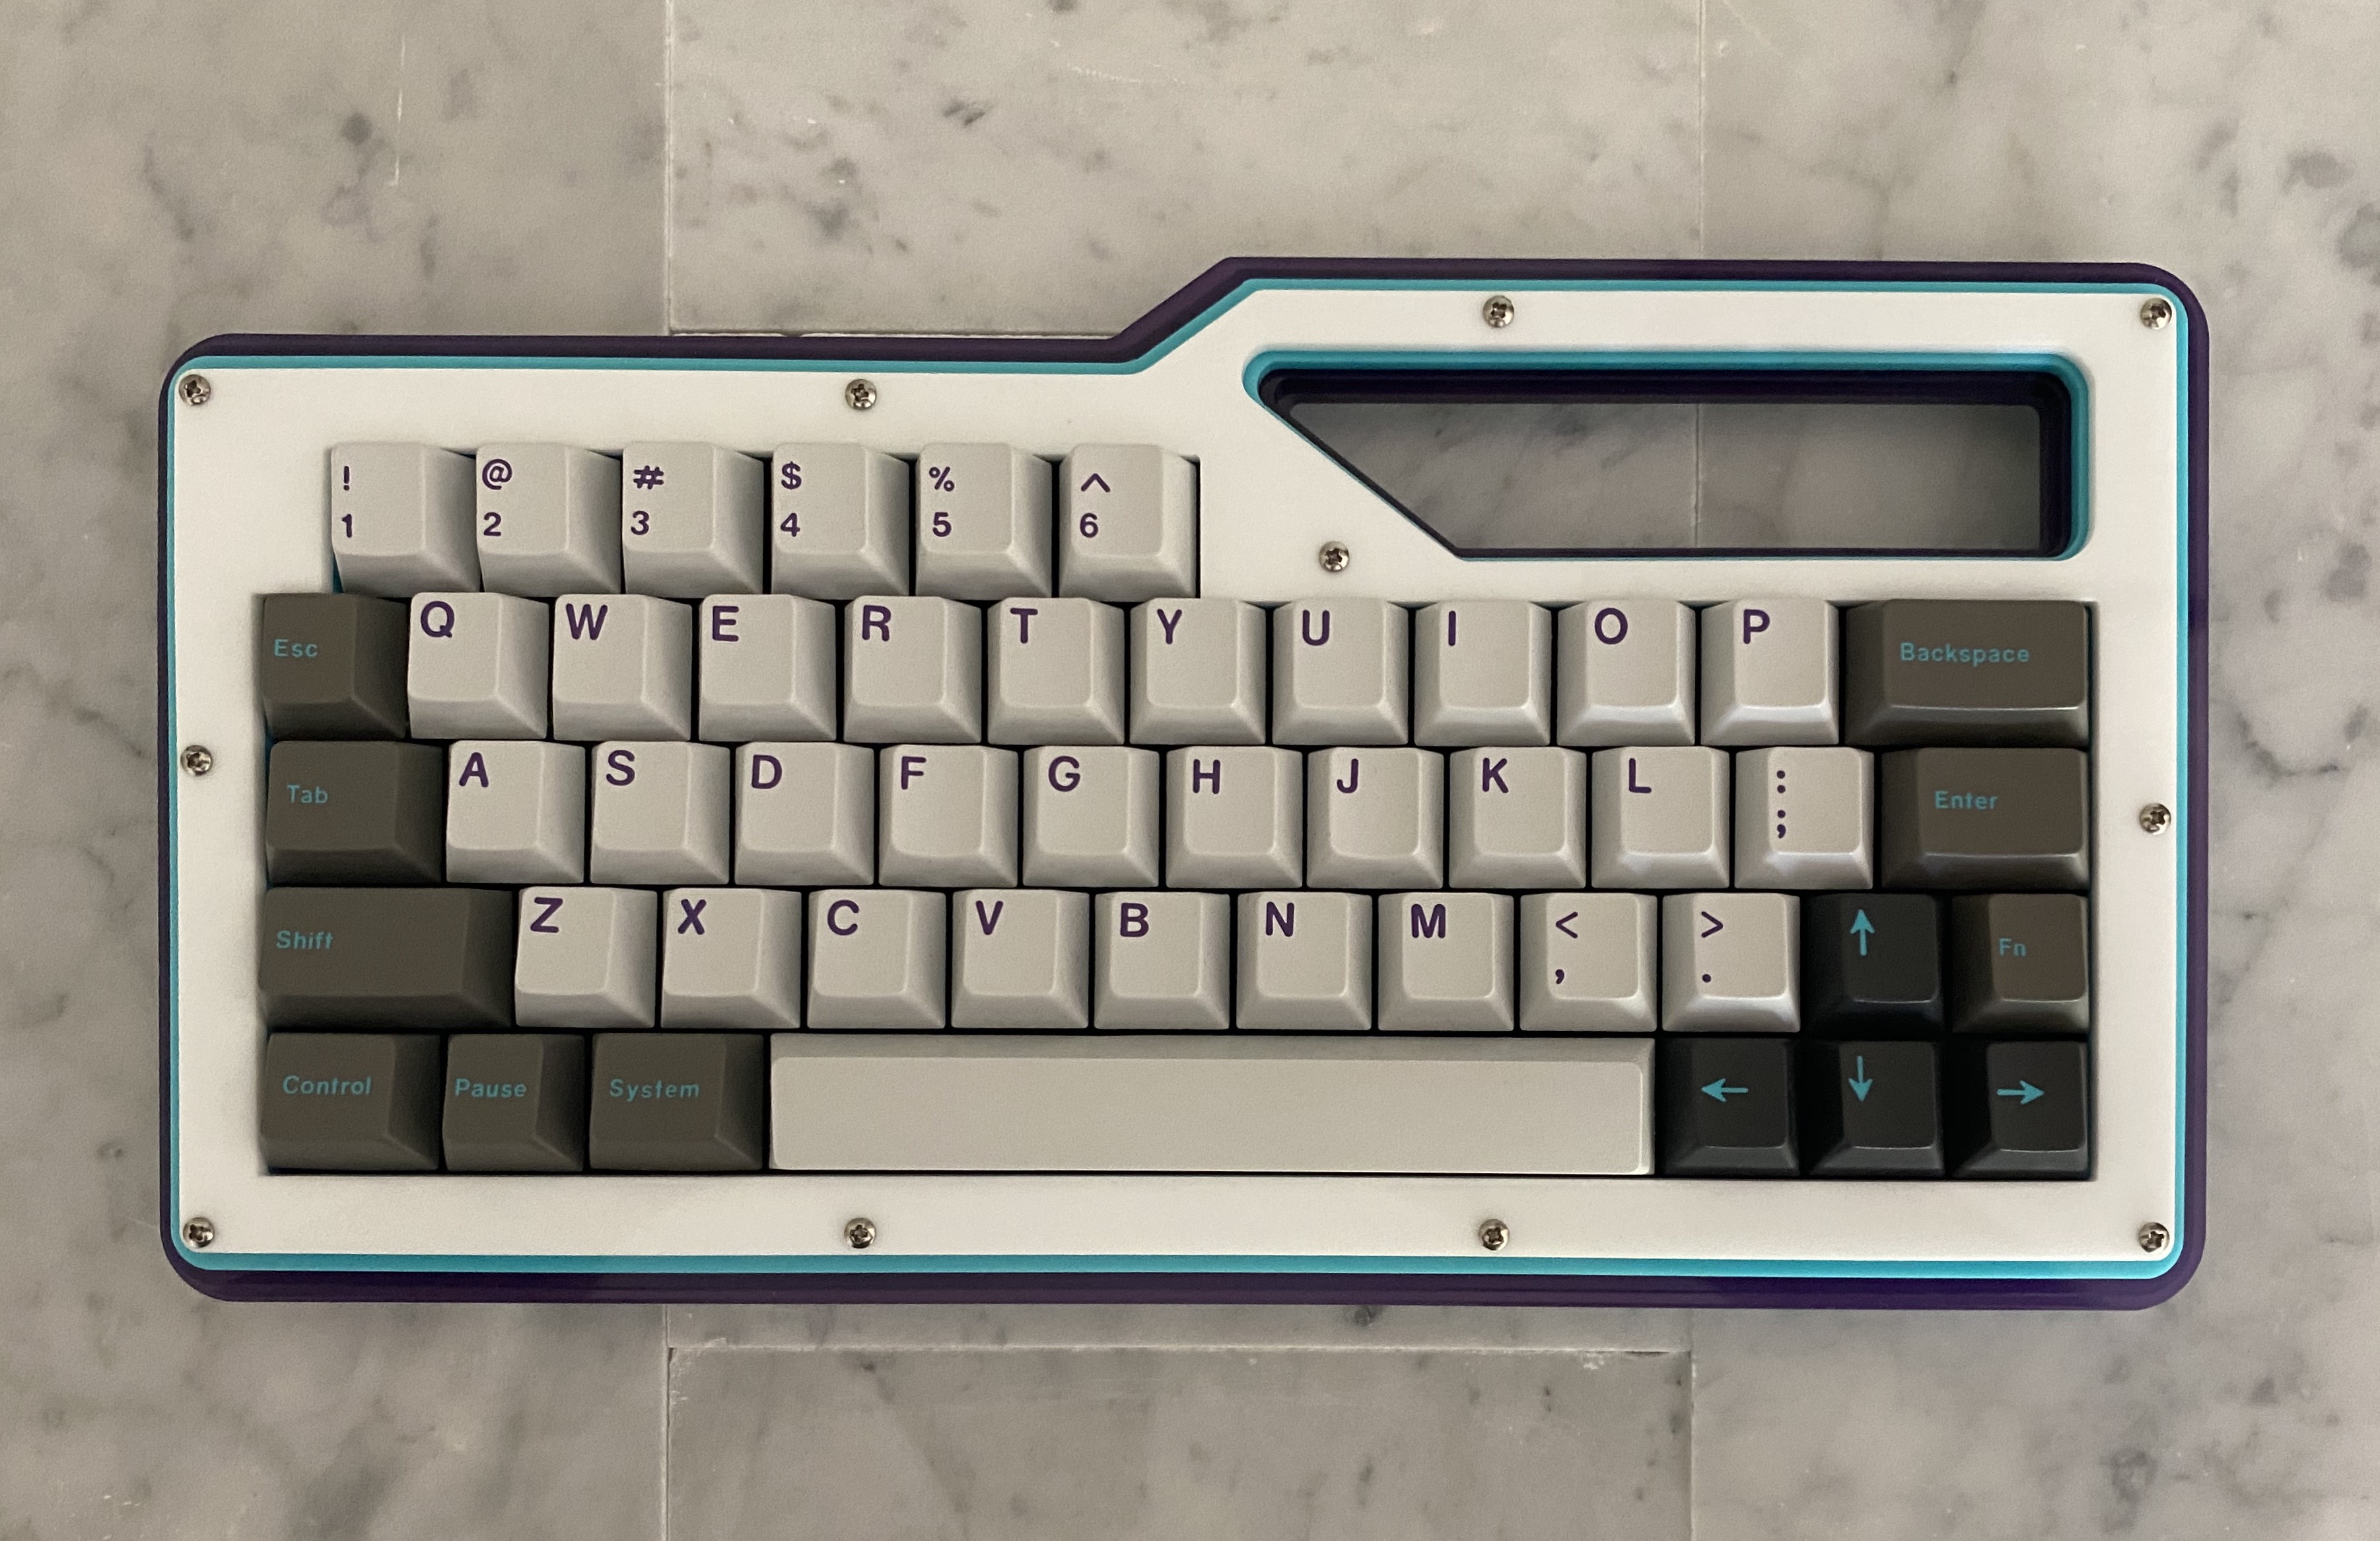 Acrylic V4N4G0N case with GMK Hyperfuse and GMK Sky Dolch arrows